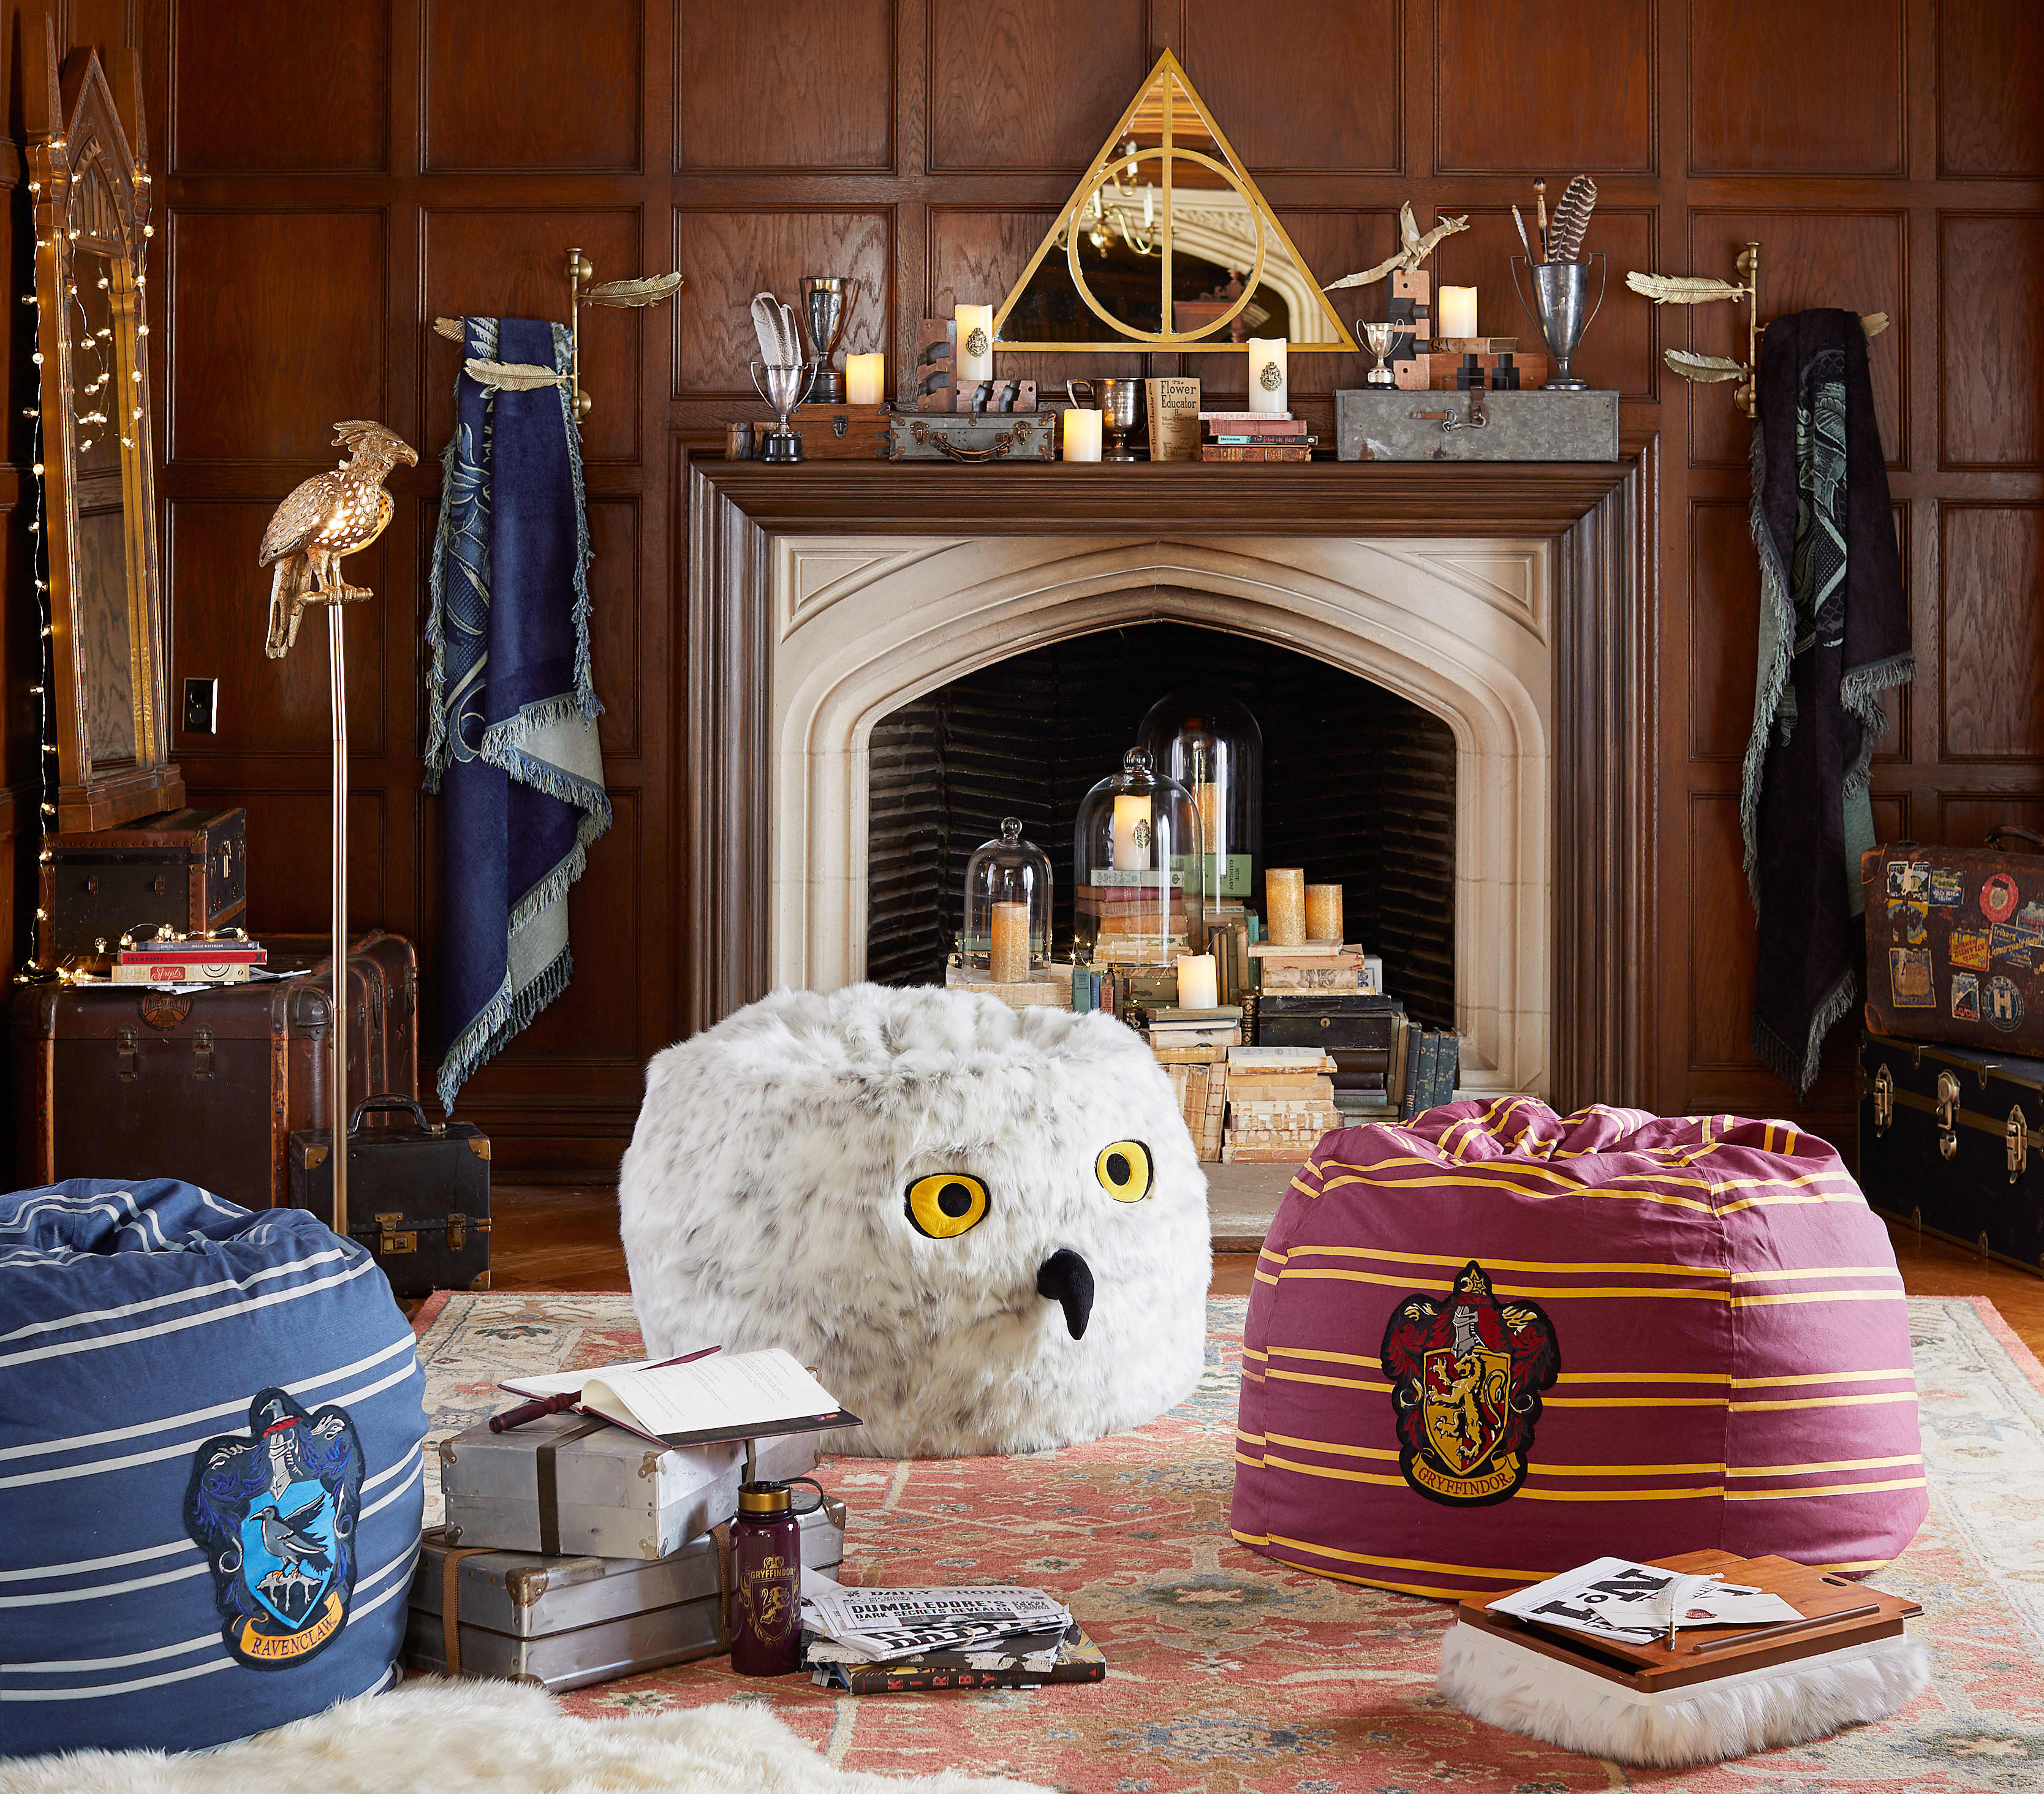 Harry Potter: How to decorate a bedroom like Hogwarts